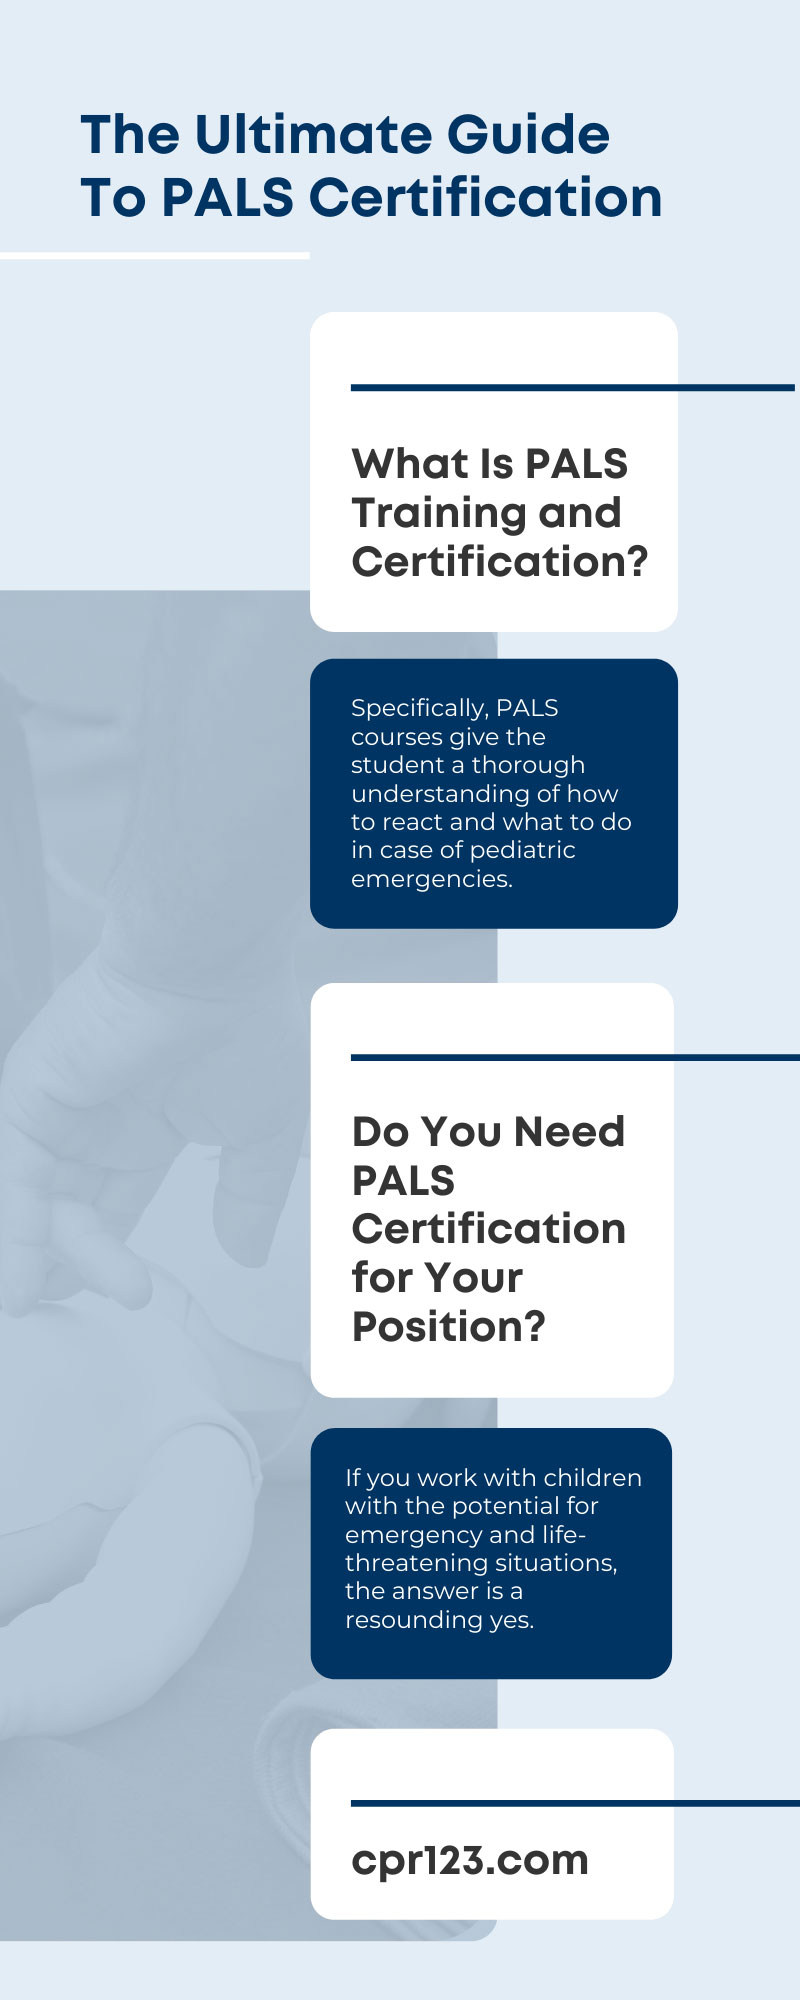 The Ultimate Guide To PALS Certification